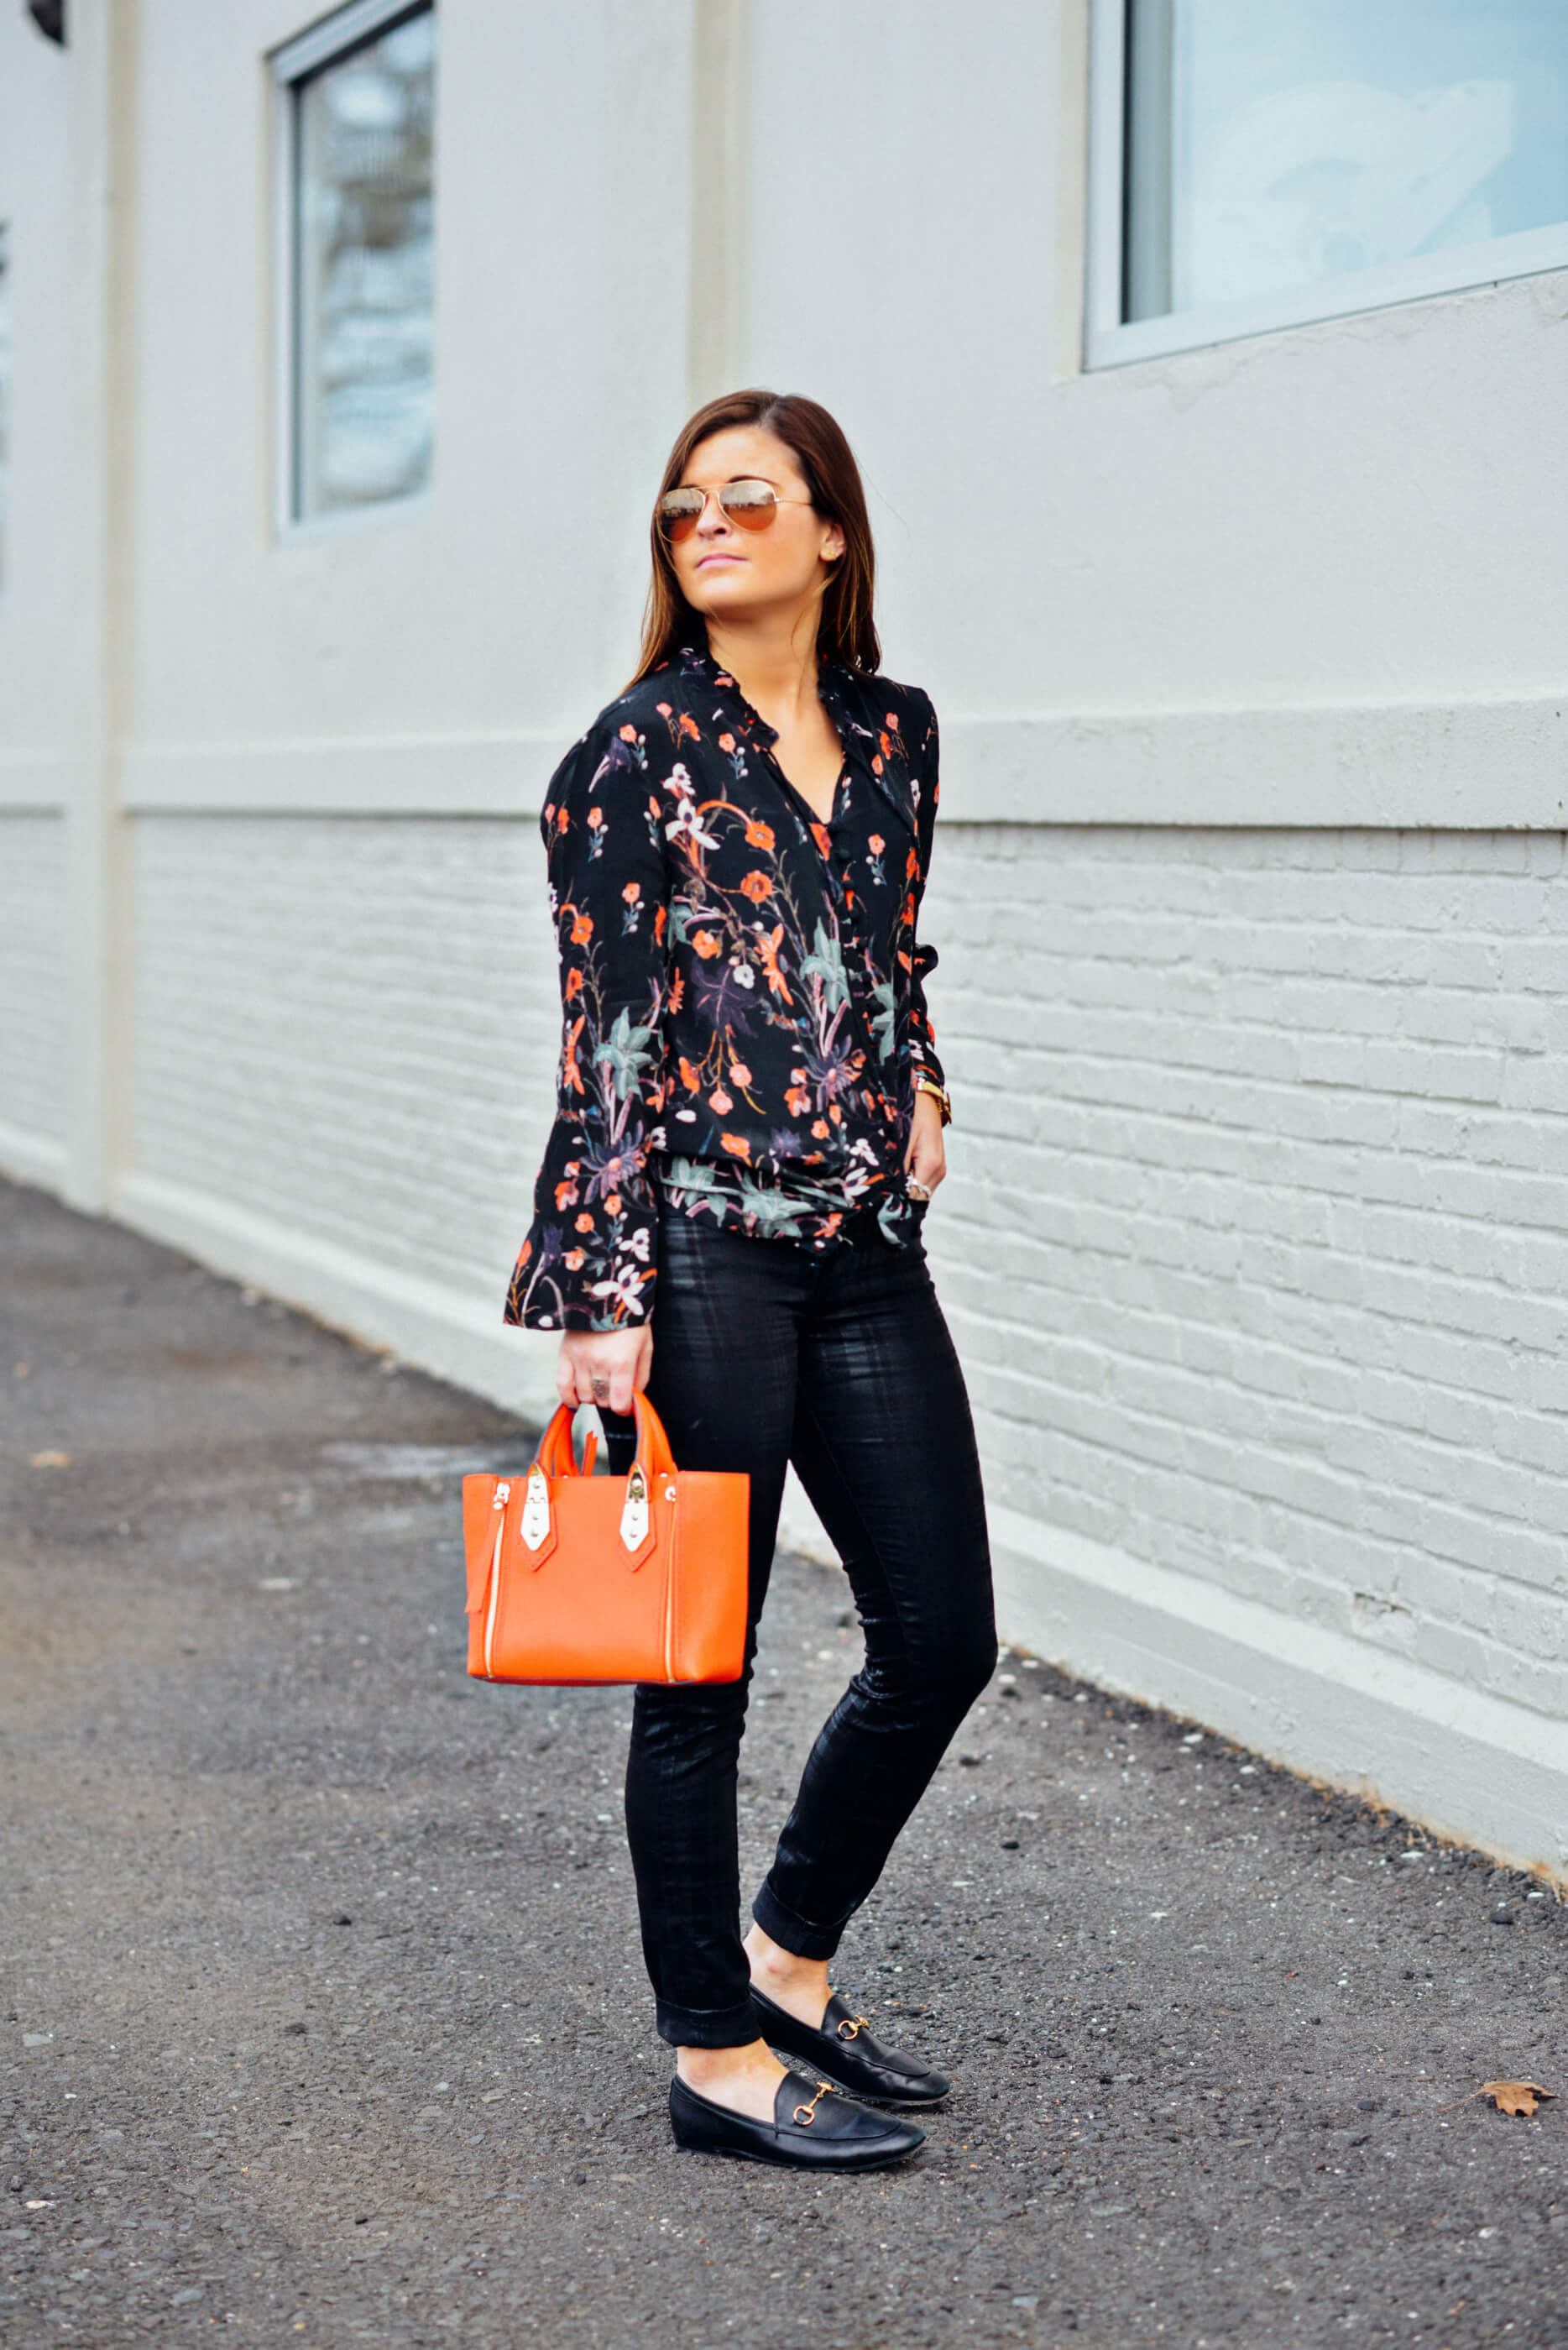 Tolani Floral Tunic Blouse, Buffalo Plaid Pants, Henri Bendel Red Bag, Spring Outfit Idea, Tilden of To Be Bright